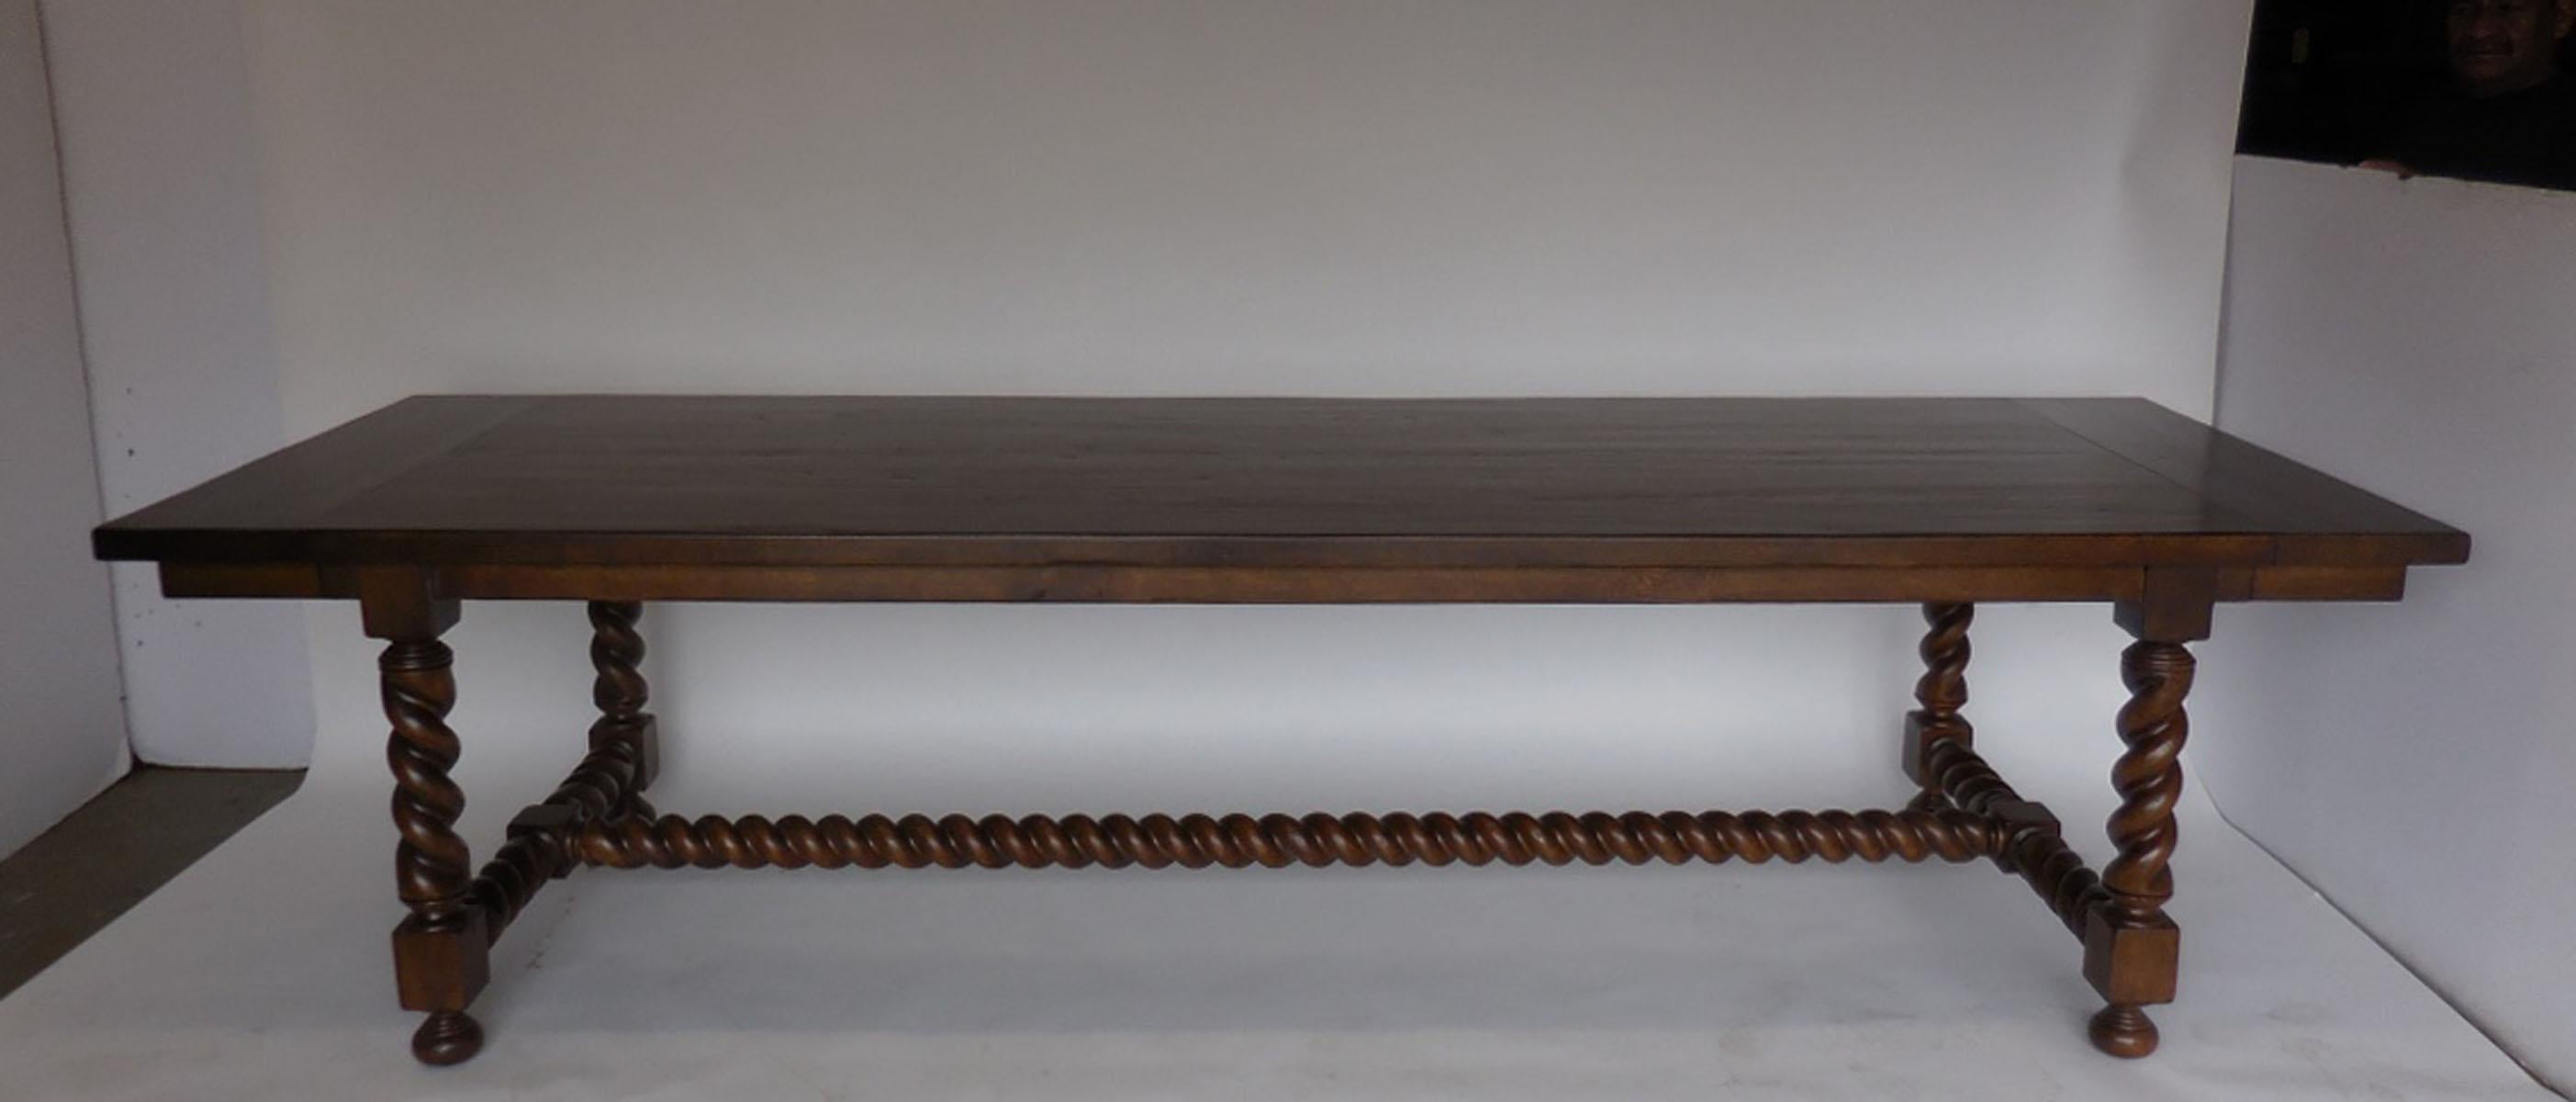 This is our custom Salamanca (barley twist leg) dining table. The 10 inch breadboards on each end pullout / pull-out to place a 14 inch leaf. Leaves have apron. This particular one measures 120 x 40 x 30.5 H but can be made in any size, with or